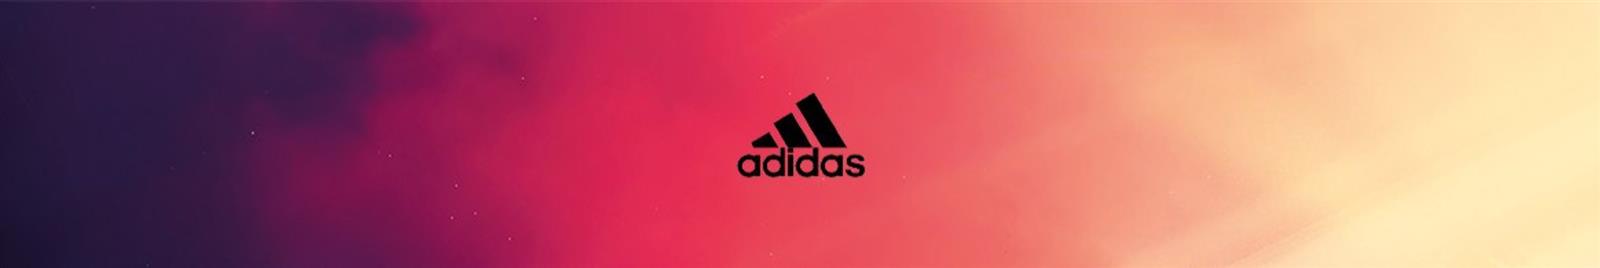 Adidas products